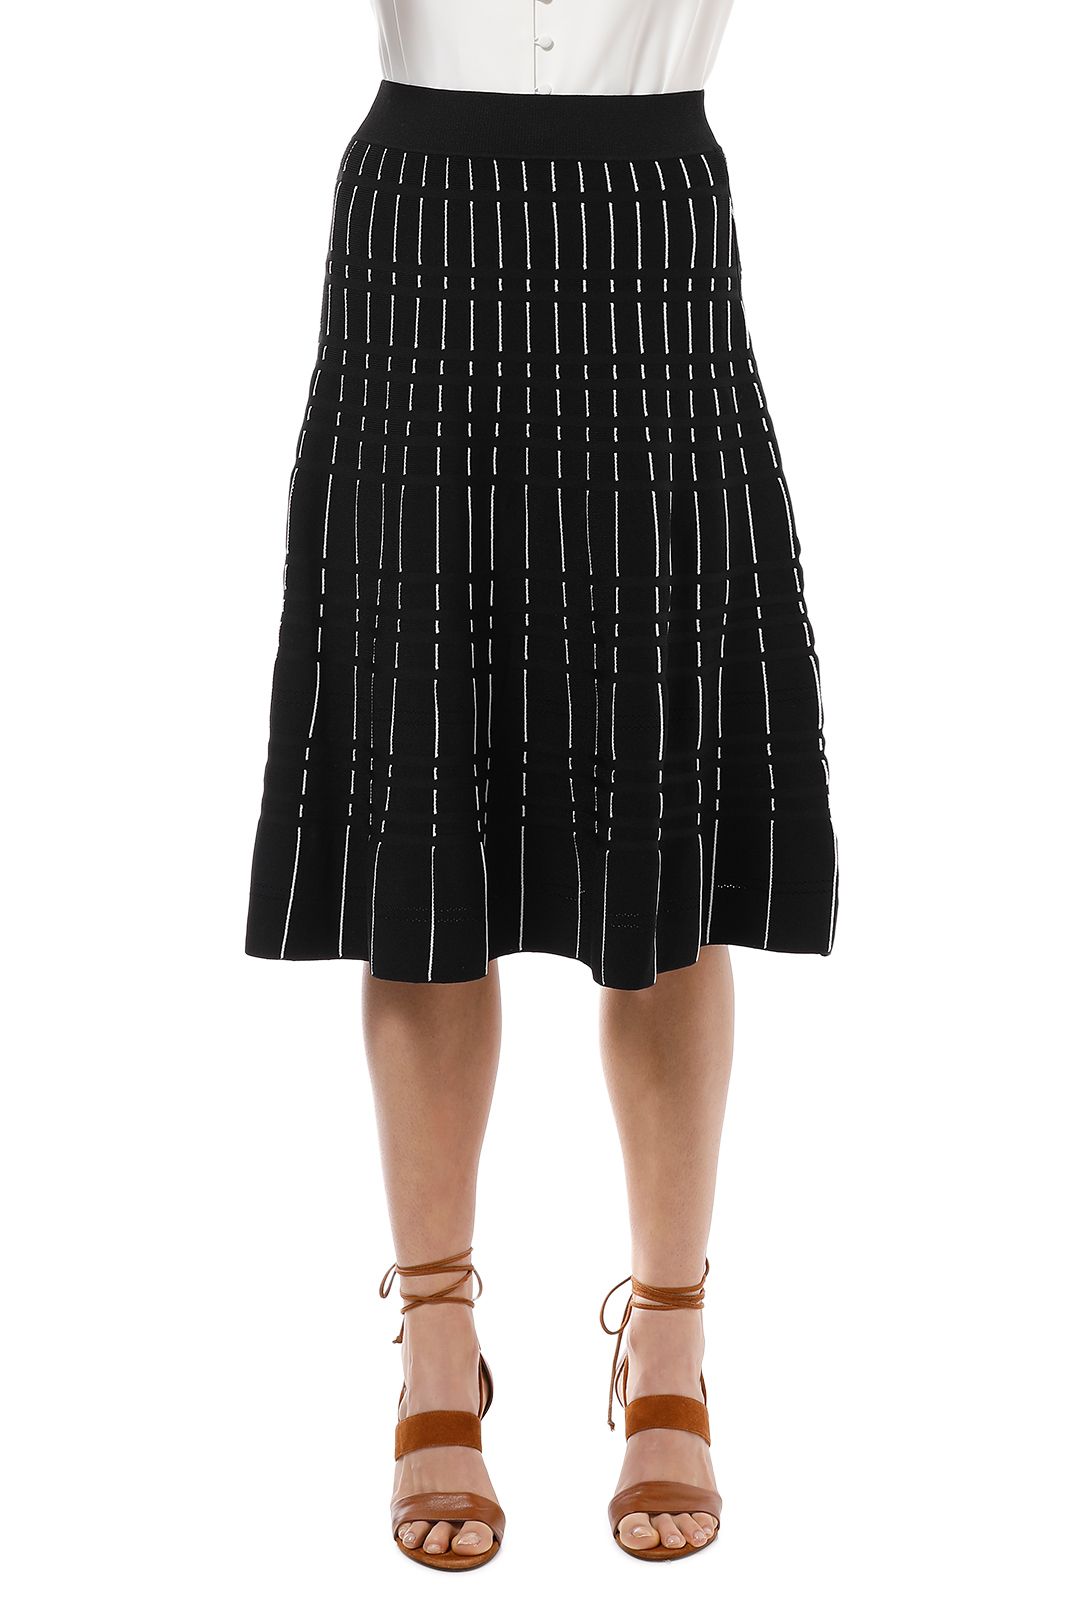 Milly Milano Skirt by Saba for Hire | GlamCorner